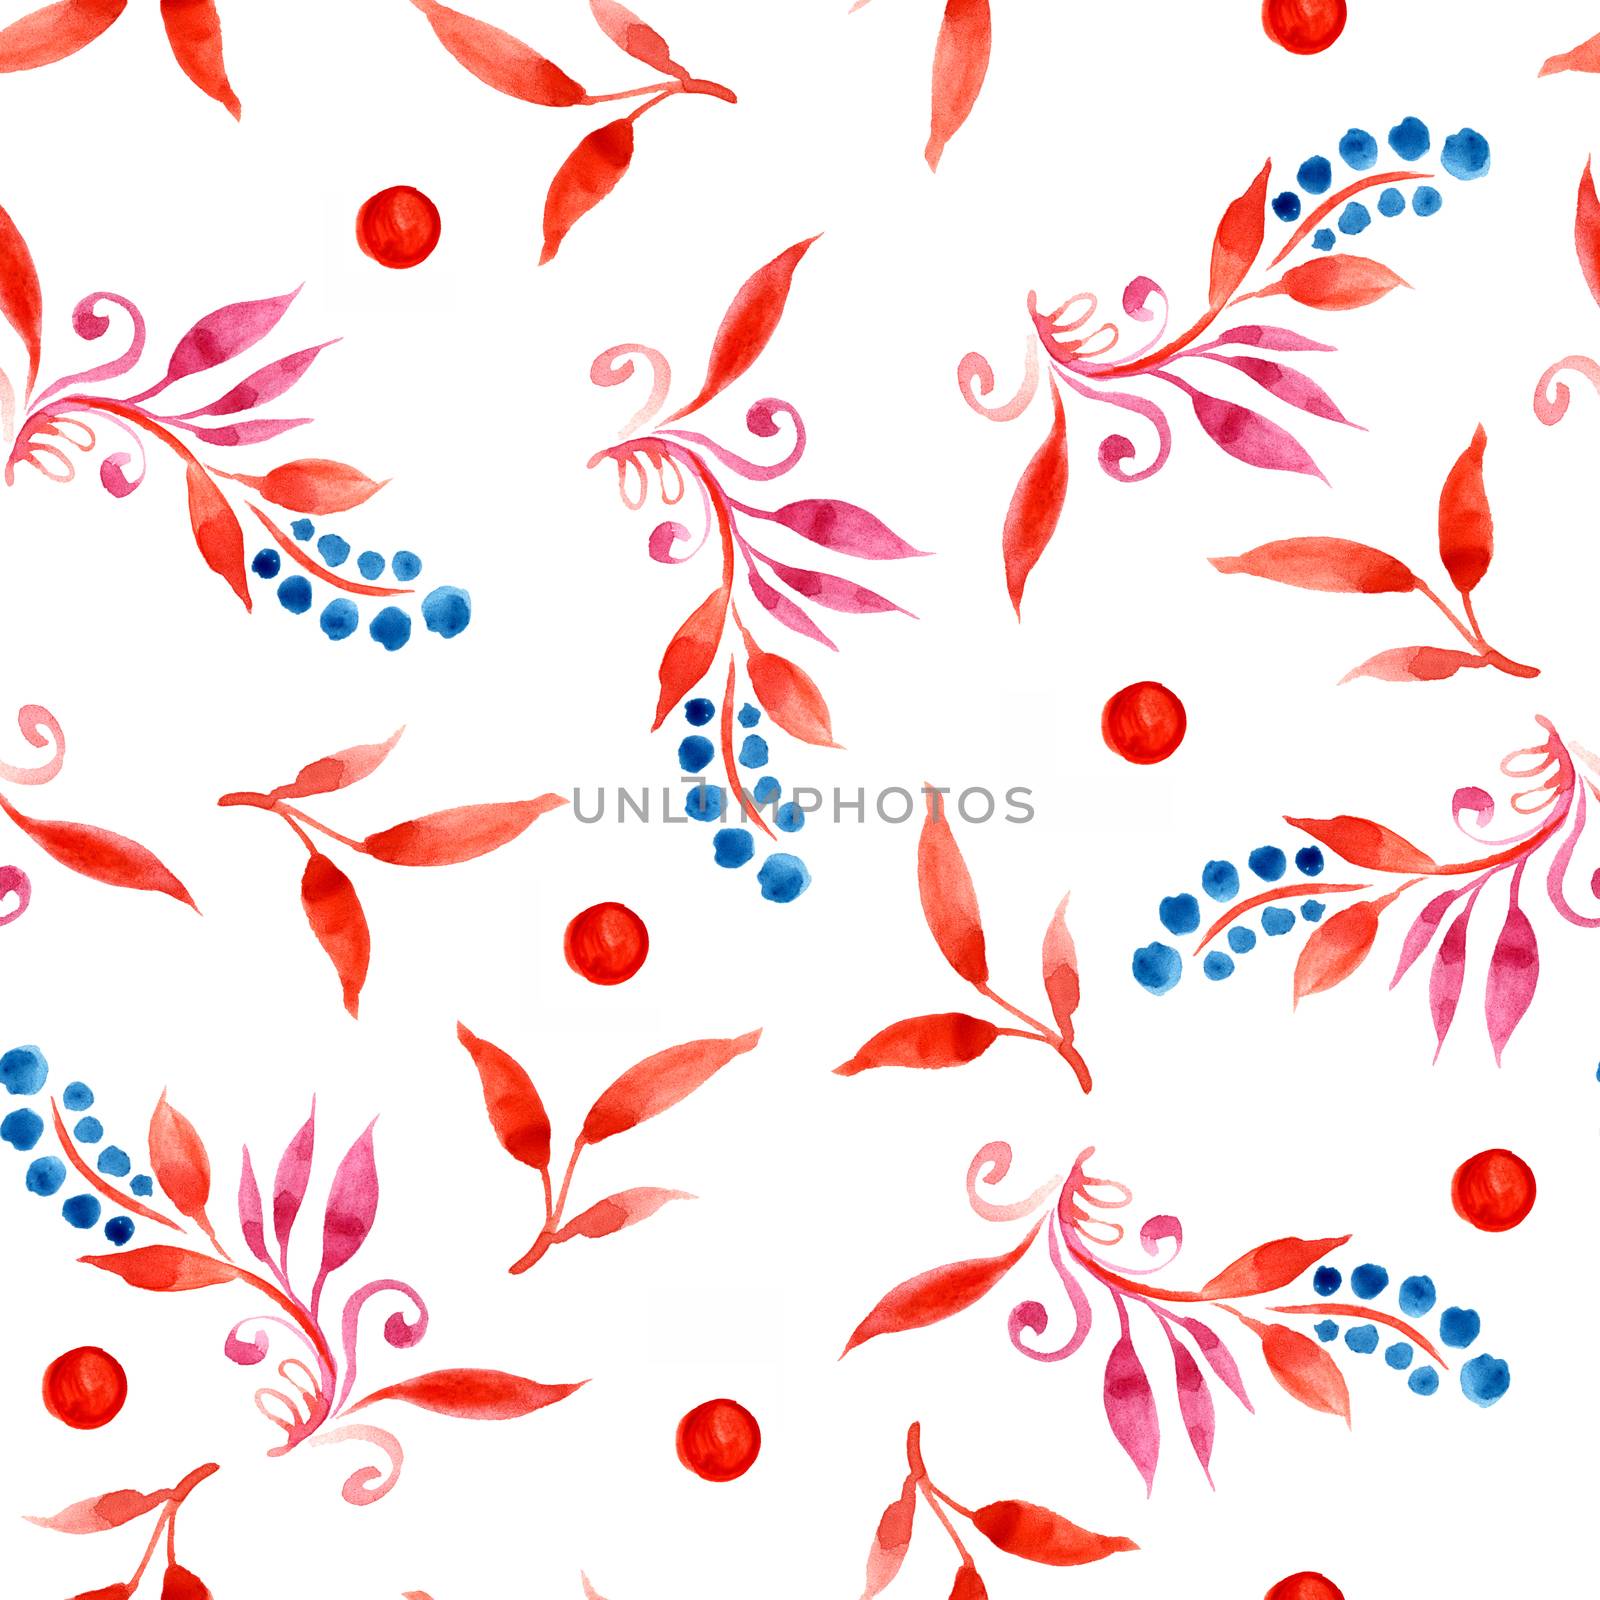 floral watercolor seamless pattern with leaves and berries in red and blue colors by LanaLeta